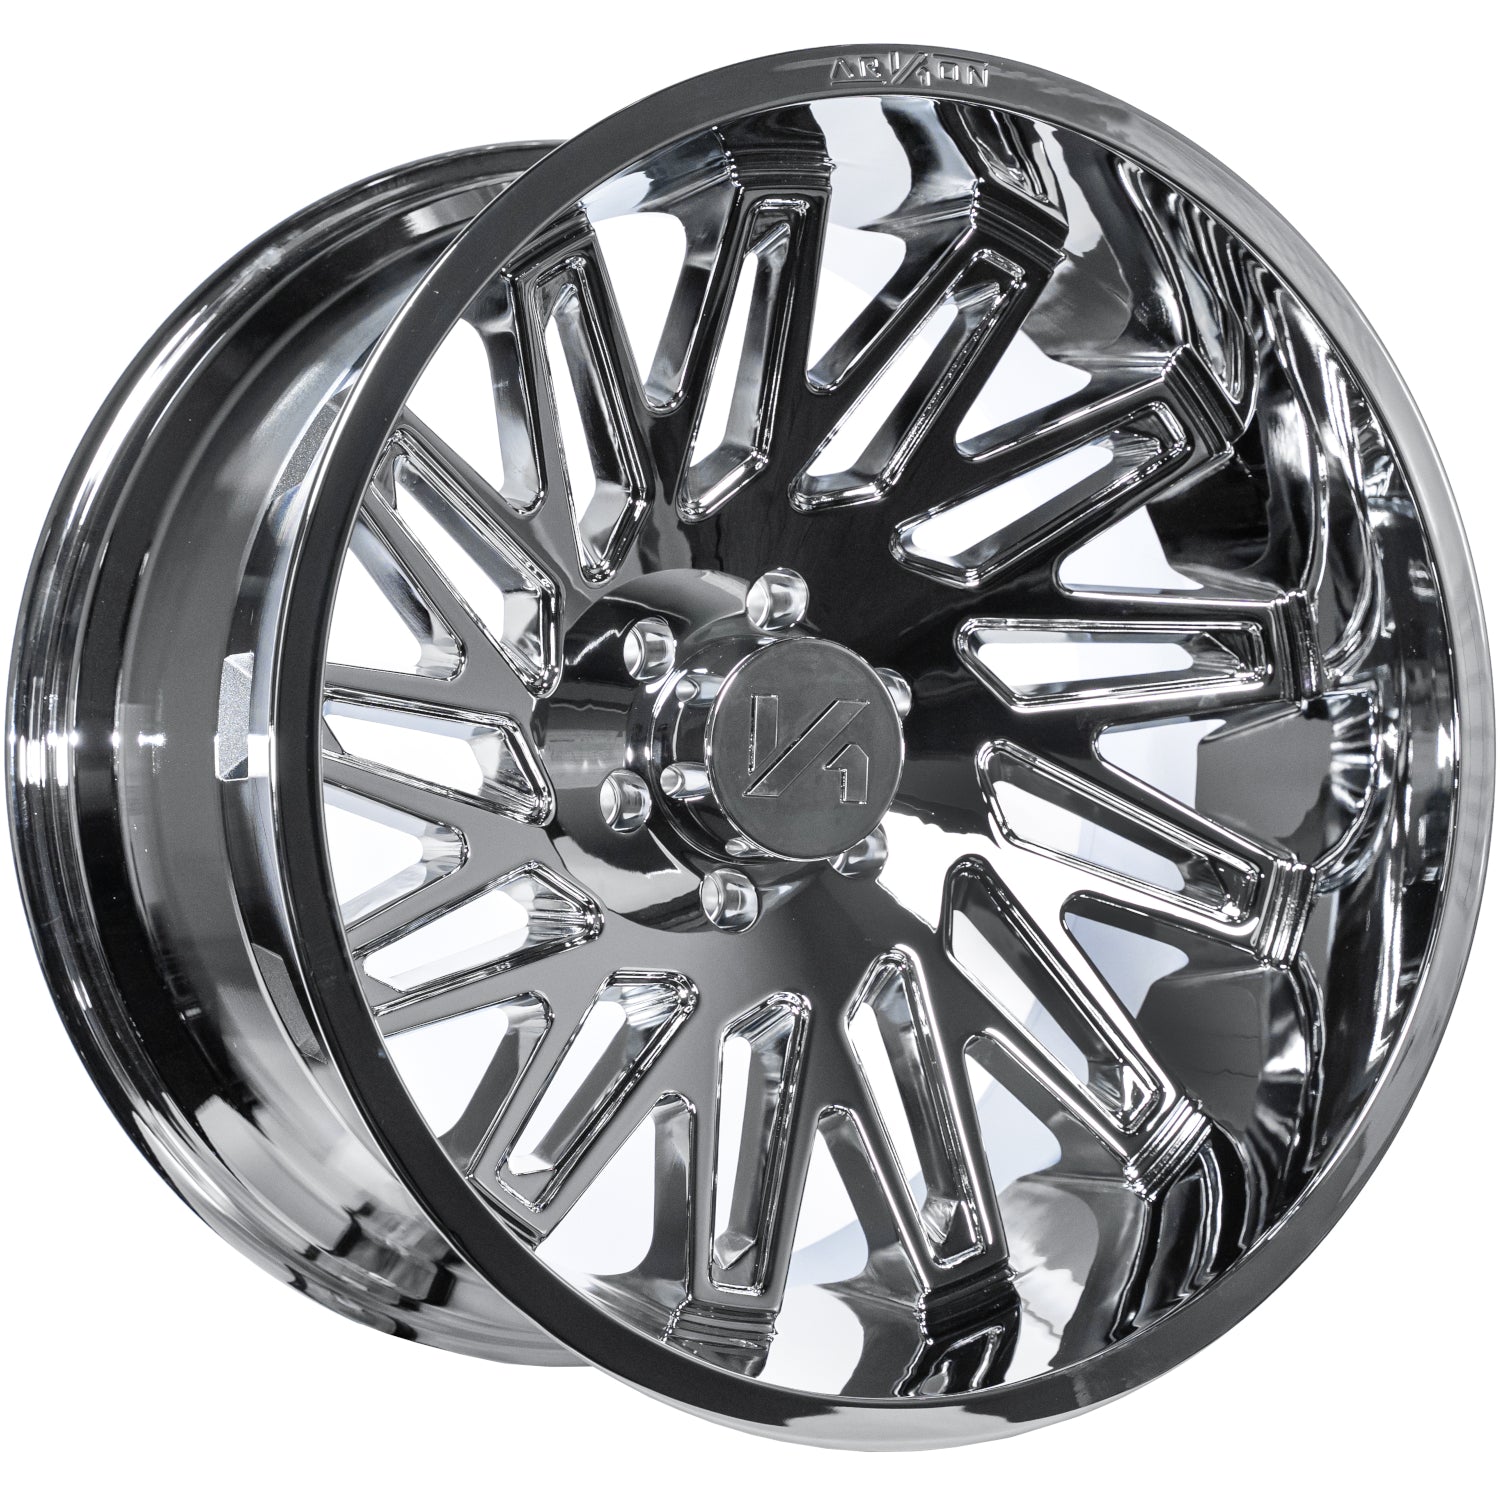 Armstrong Off Road Wheels Chrome 22x12 Left 6x5.5 -51 108mm